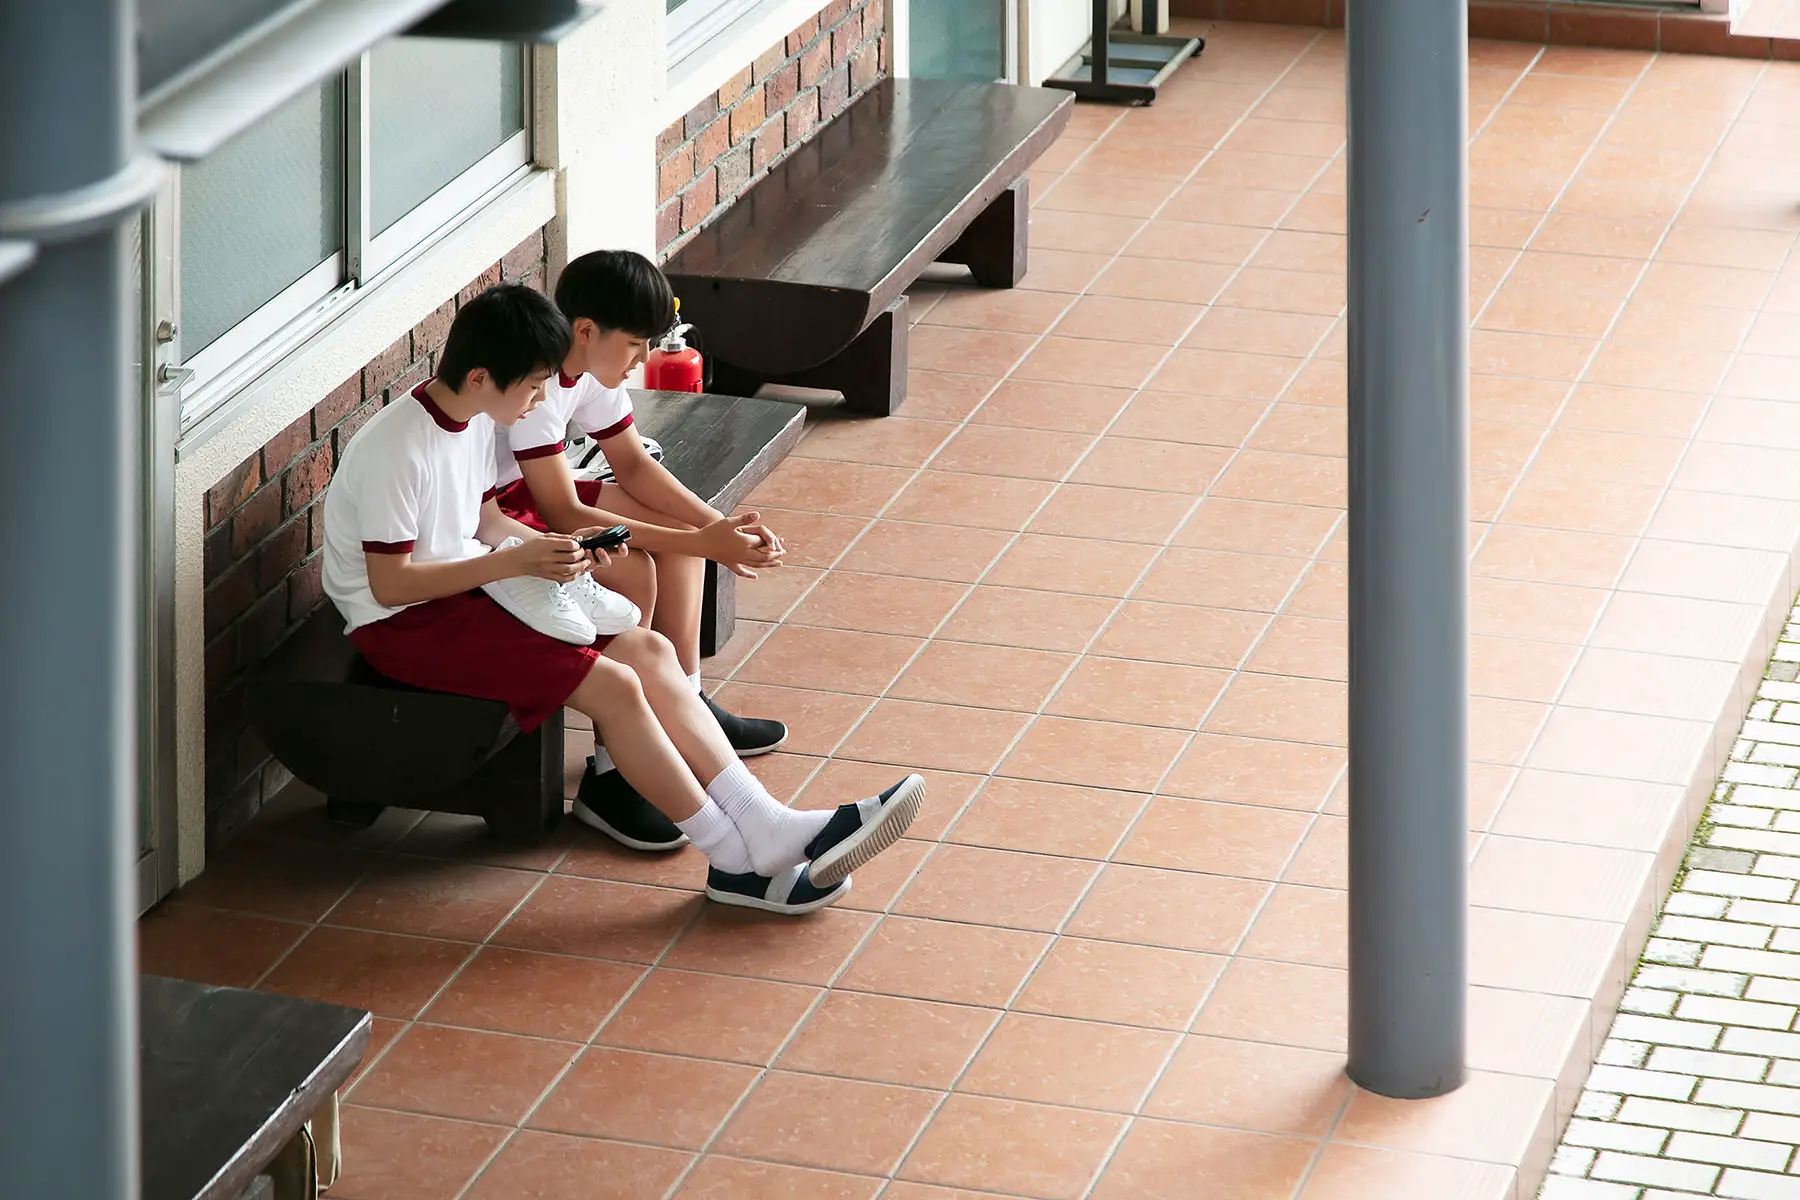 Two Japanese junior high school students sitting on a bench in the hallway, talking to each other.